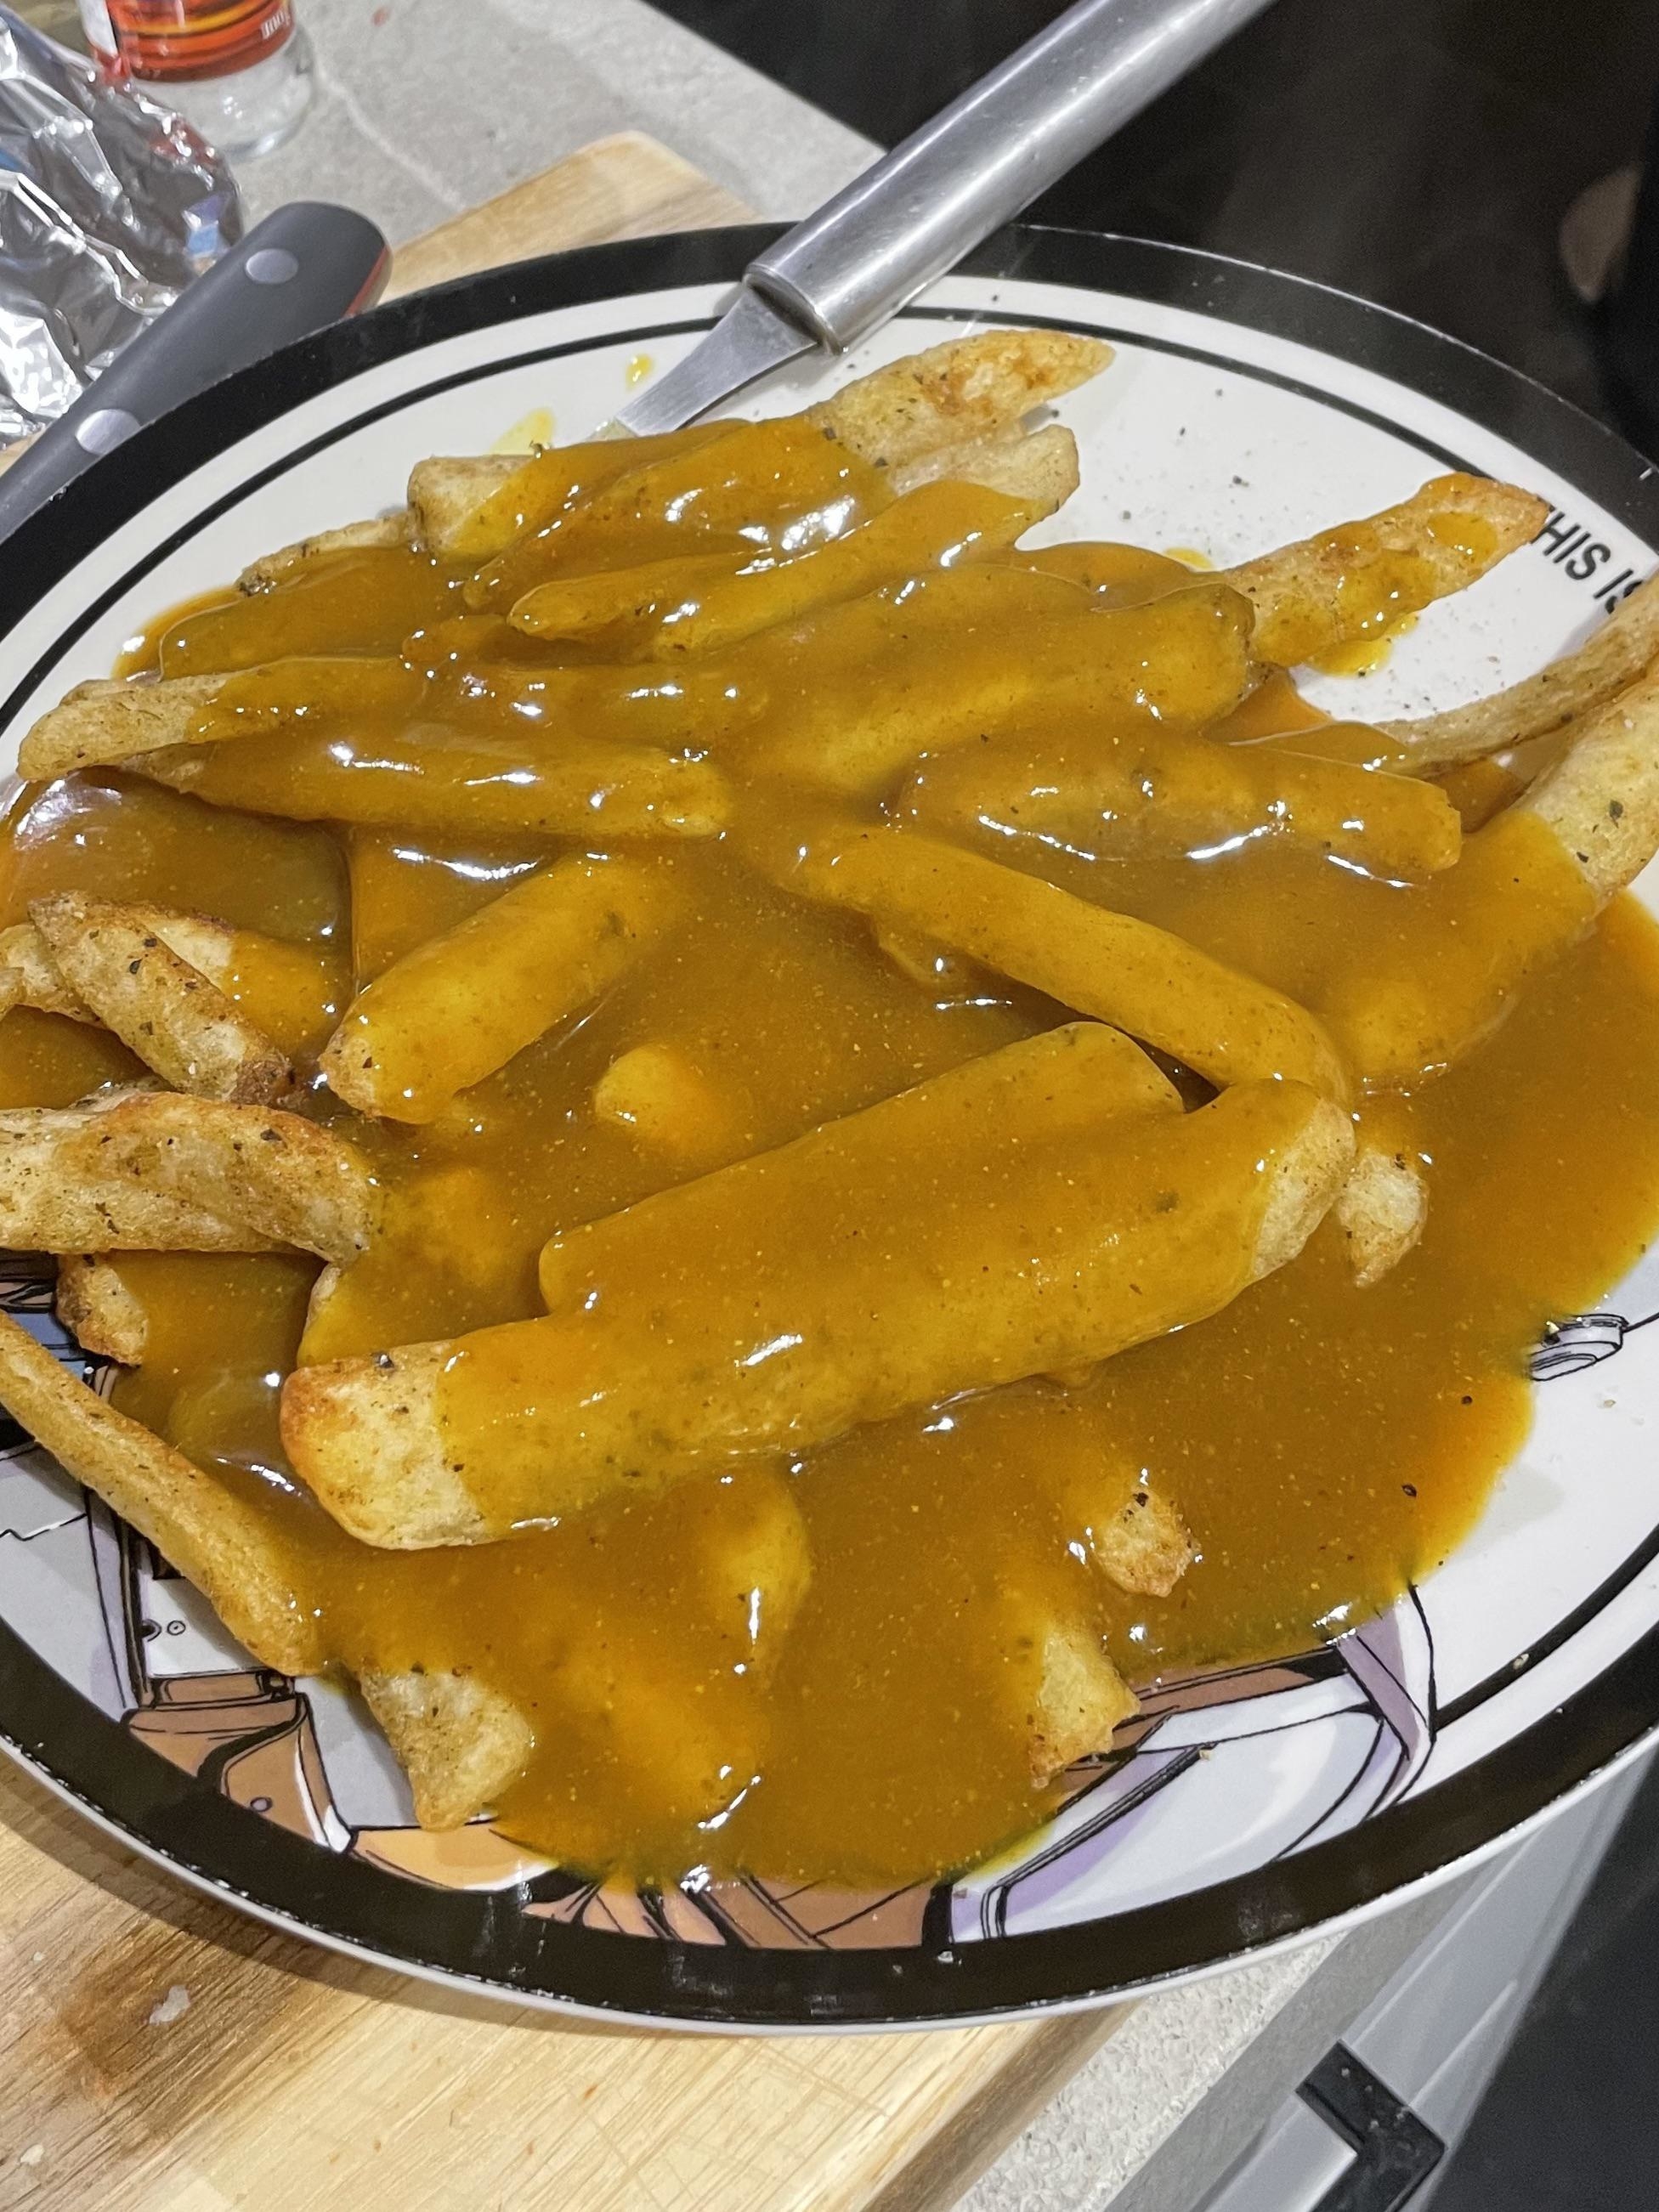 fries covered in a golden curry sauce